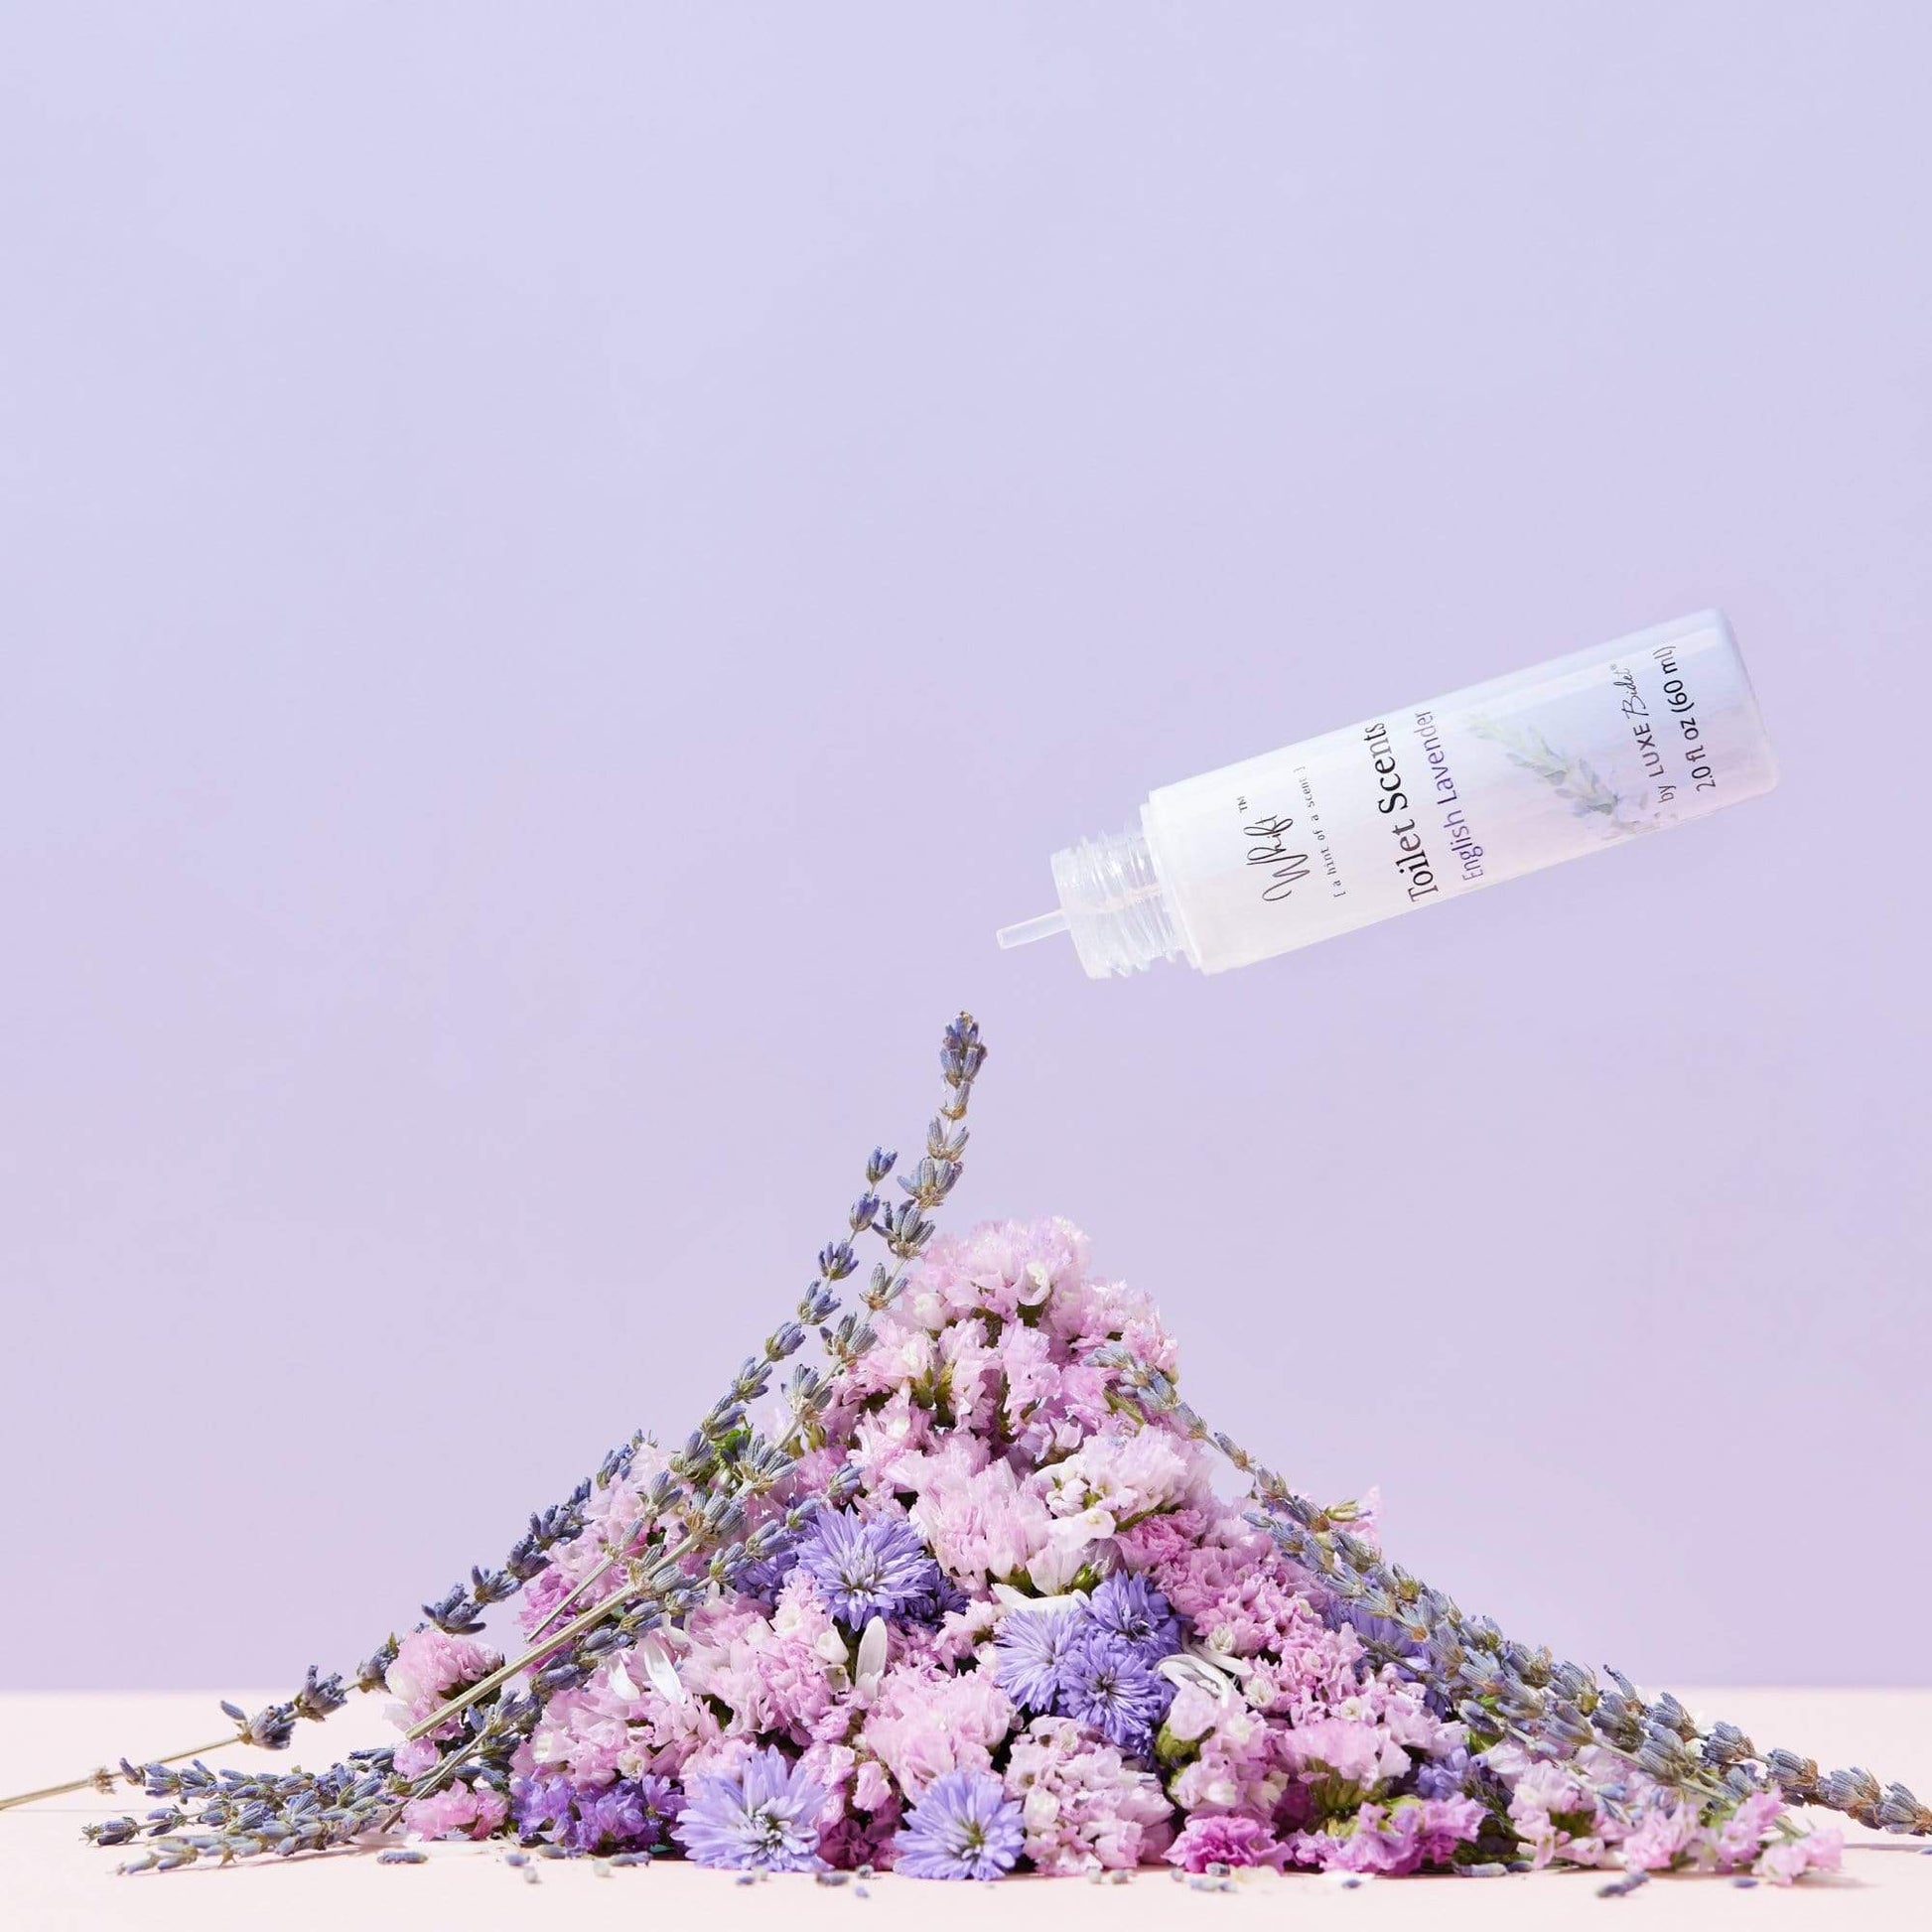 60 mL English Lavender Whift Toilet Scents Drops being squeezed over a pile of flowers